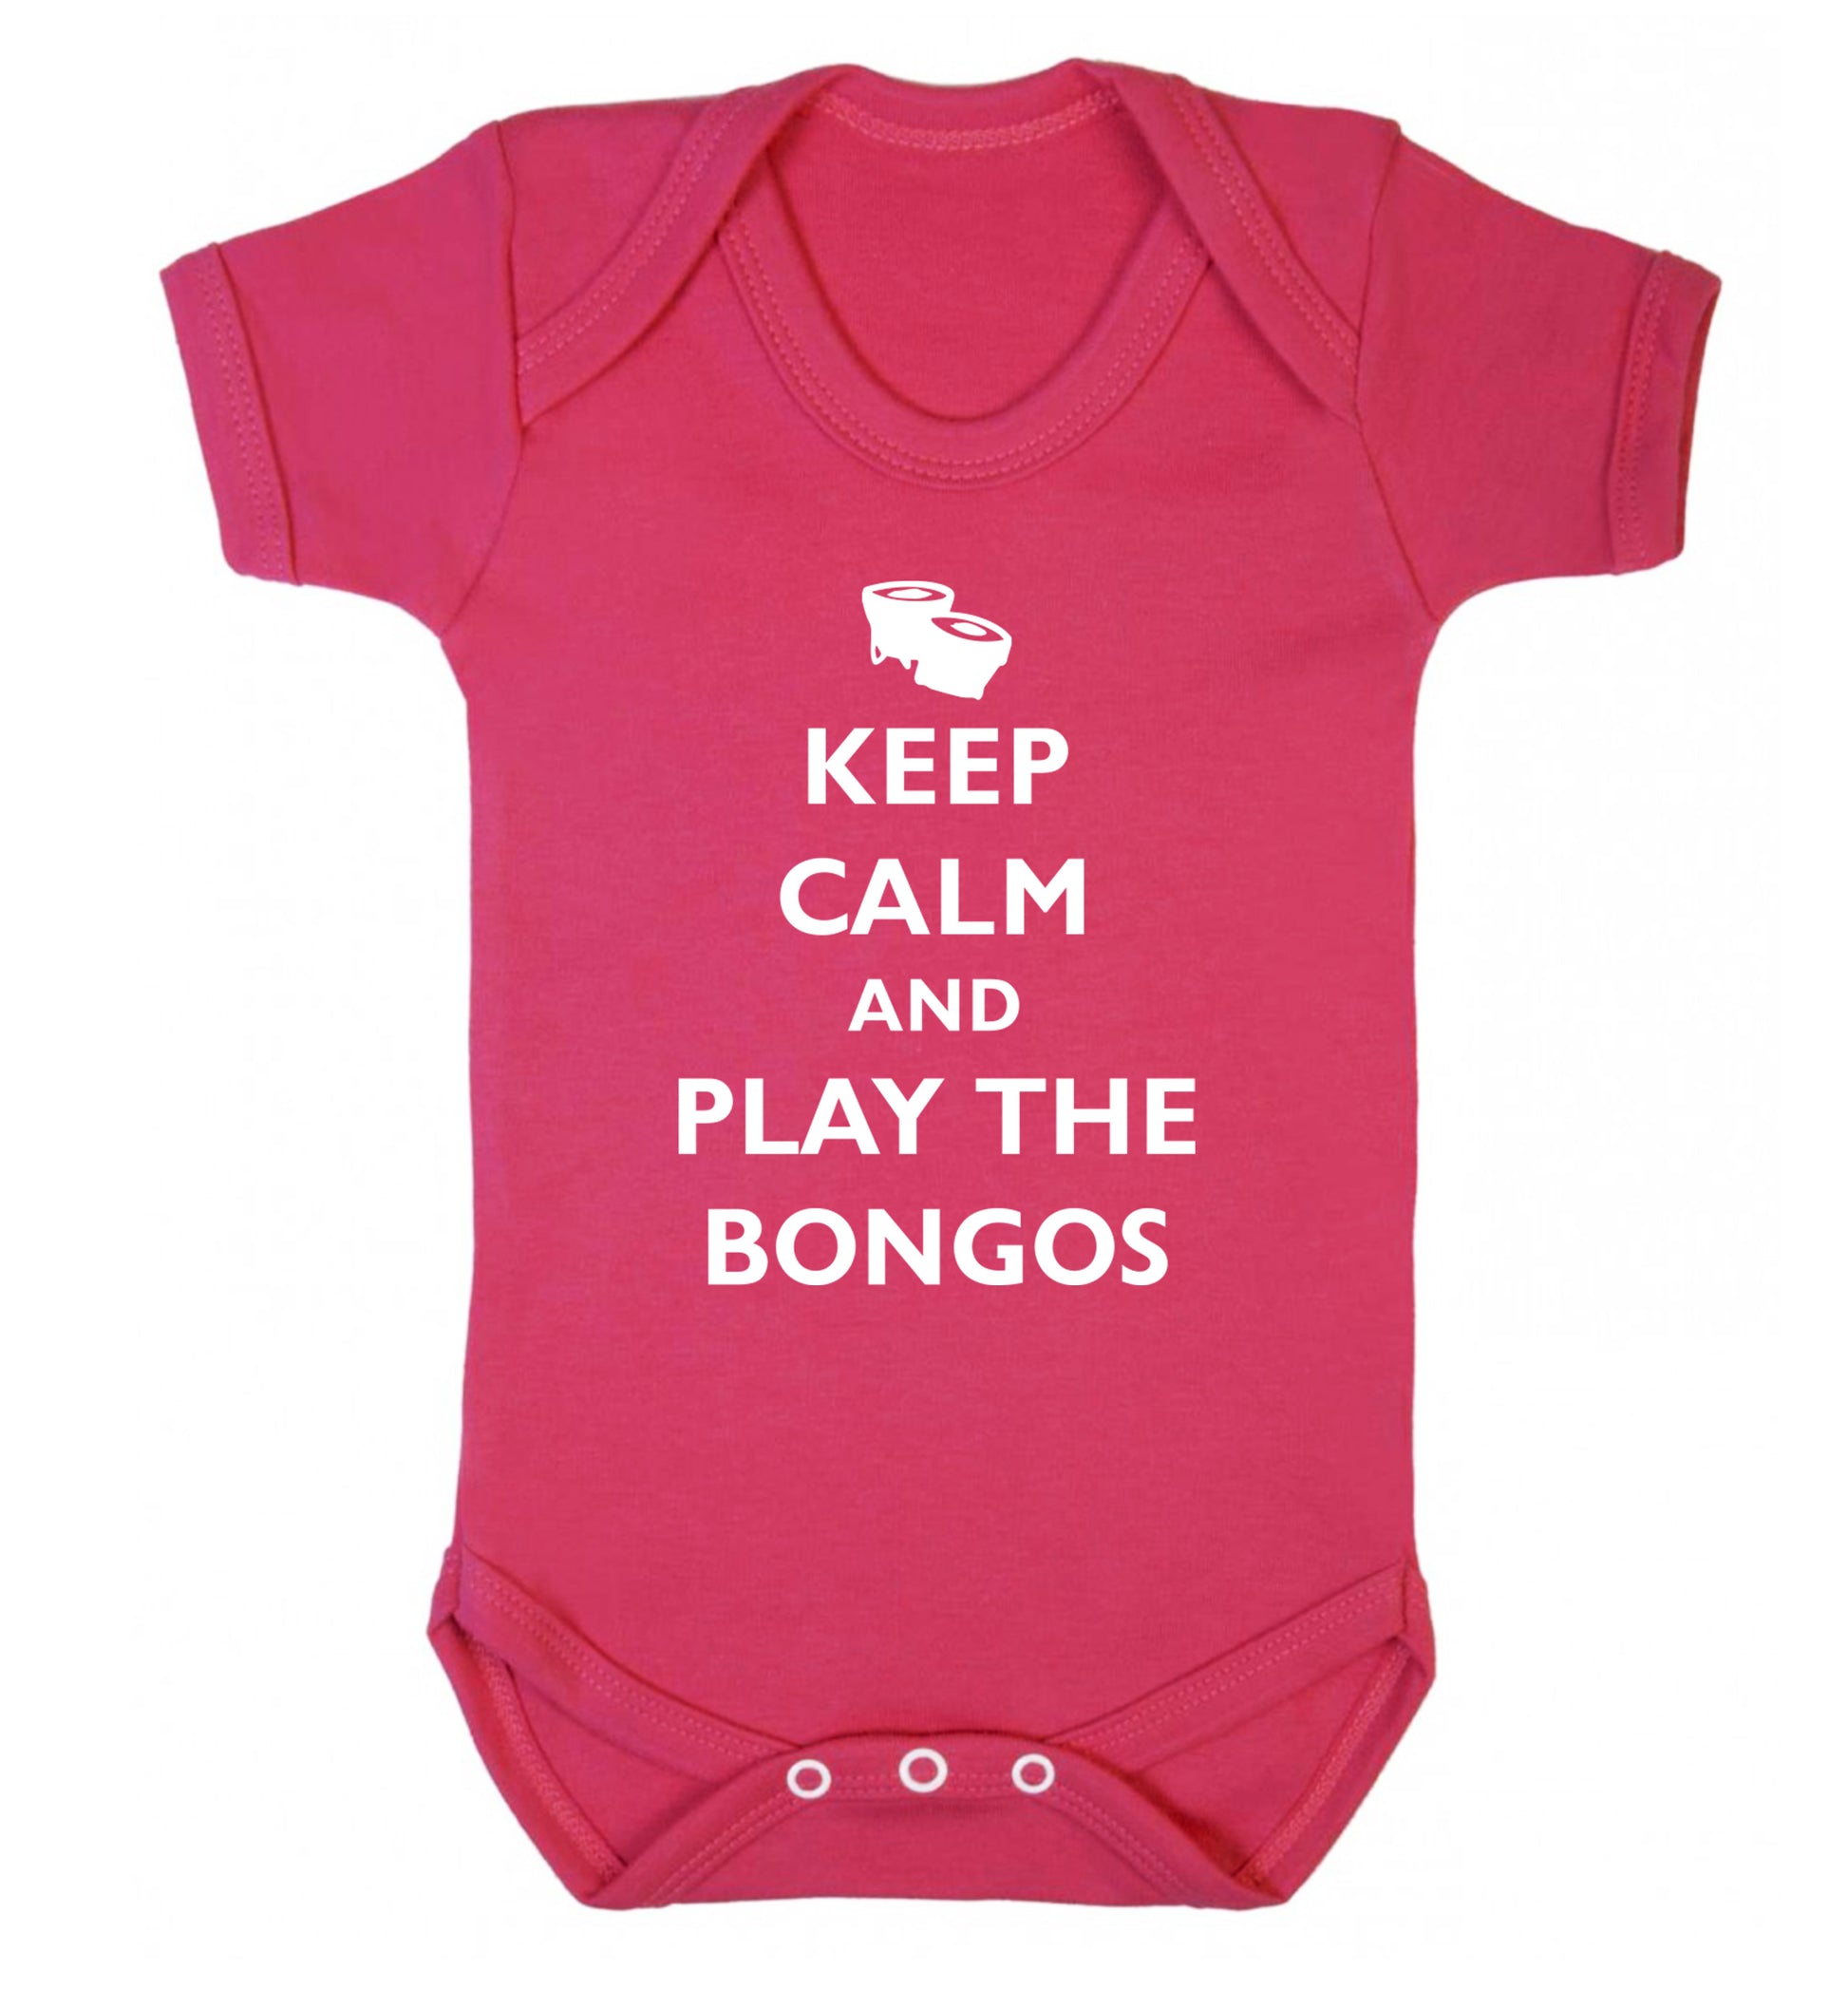 Keep calm and play the bongos Baby Vest dark pink 18-24 months